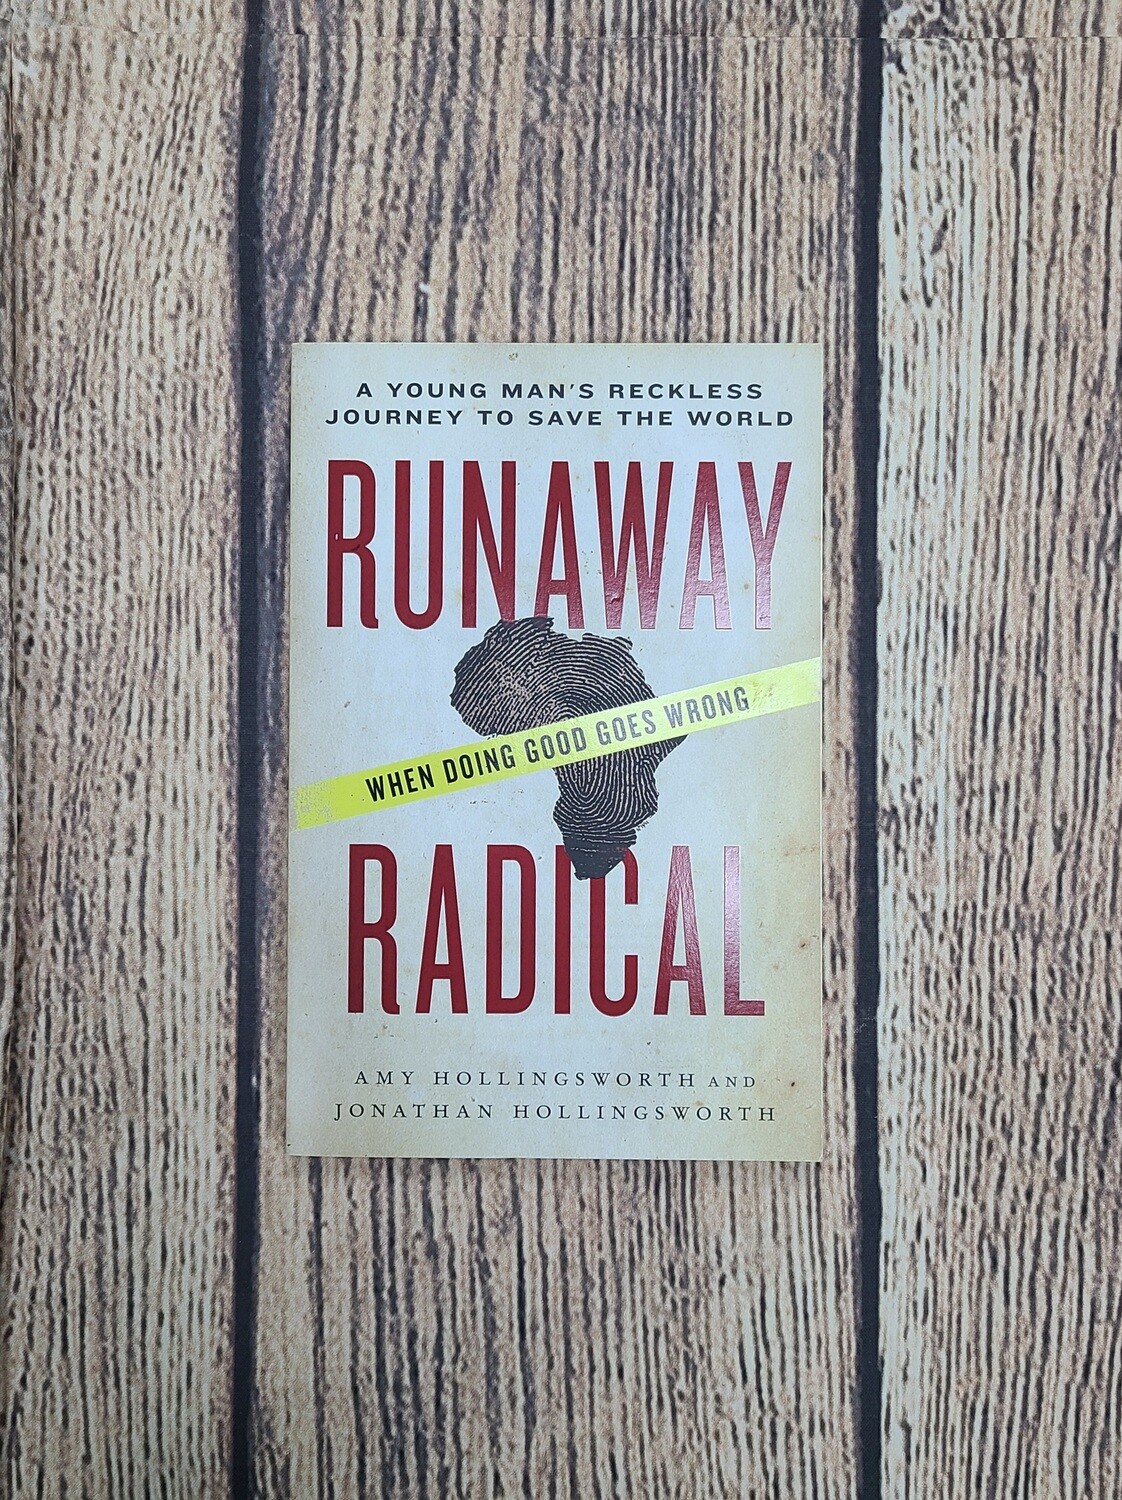 Runaway Radical: A Young Man's Reckless Journey to Save the World by Amy Hollingsworth and Jonathan Hollingsworth